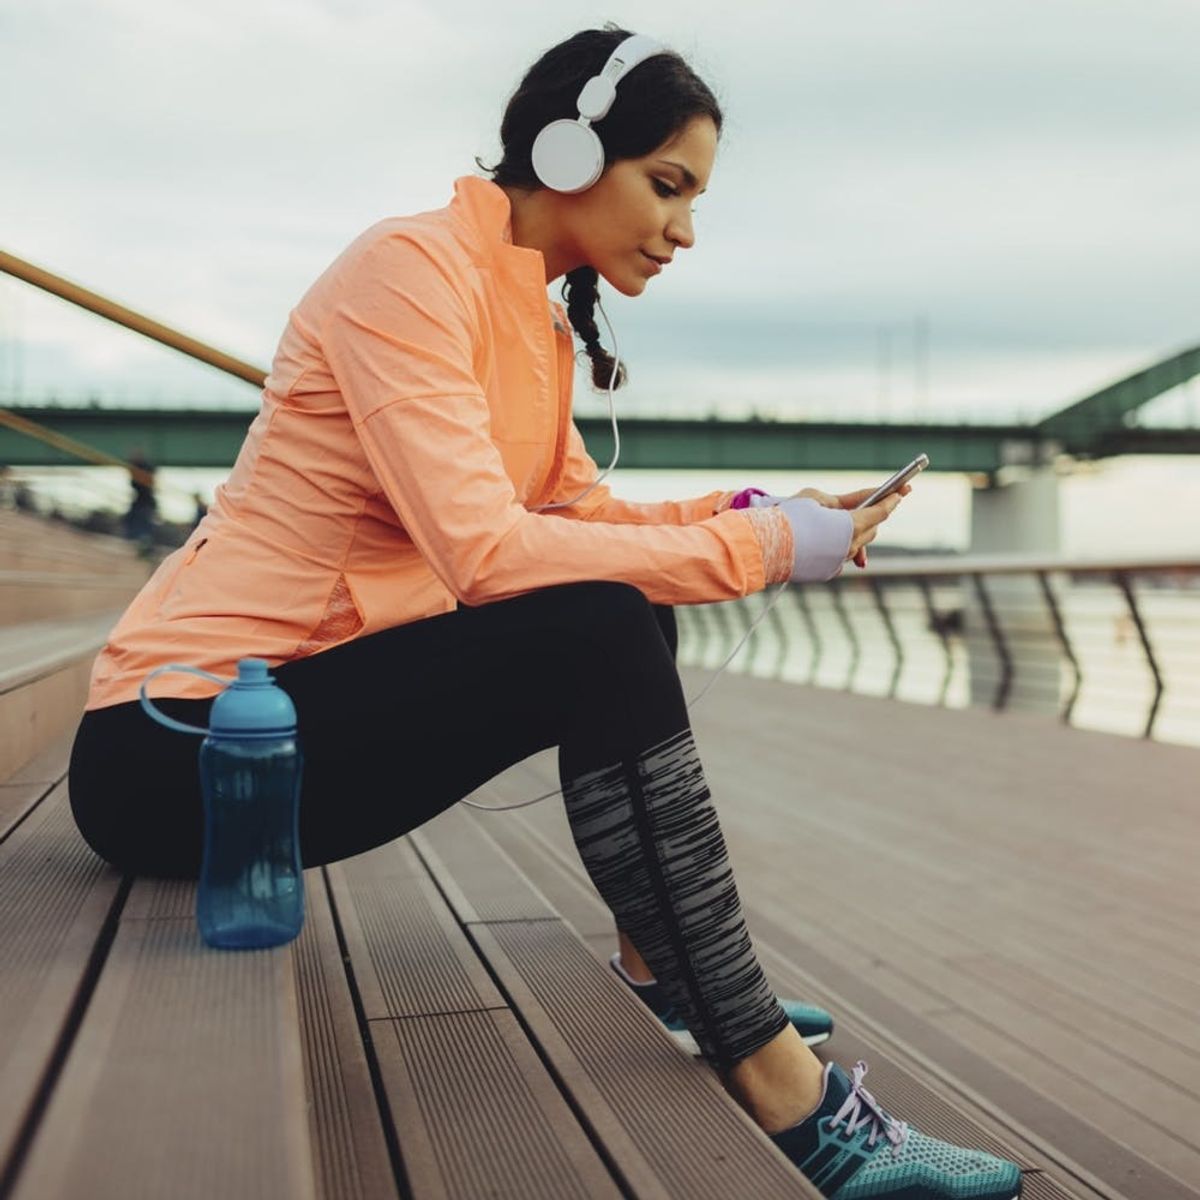 10 Podcasts That’ll Help You Be Your Healthiest Self